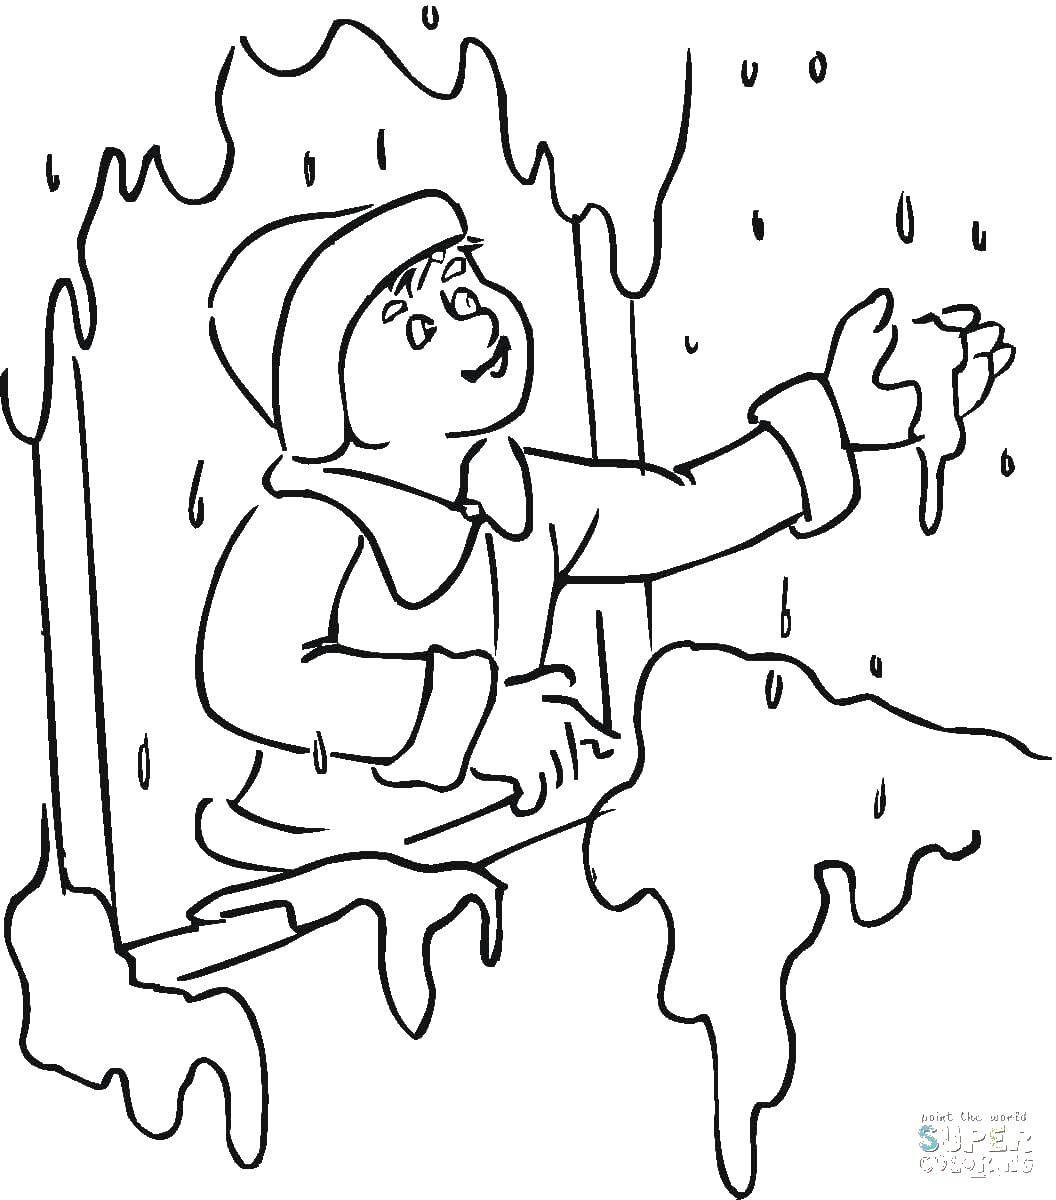 Coloring Boy holding snow. Category coloring. Tags:  snowfall, snow, boy.